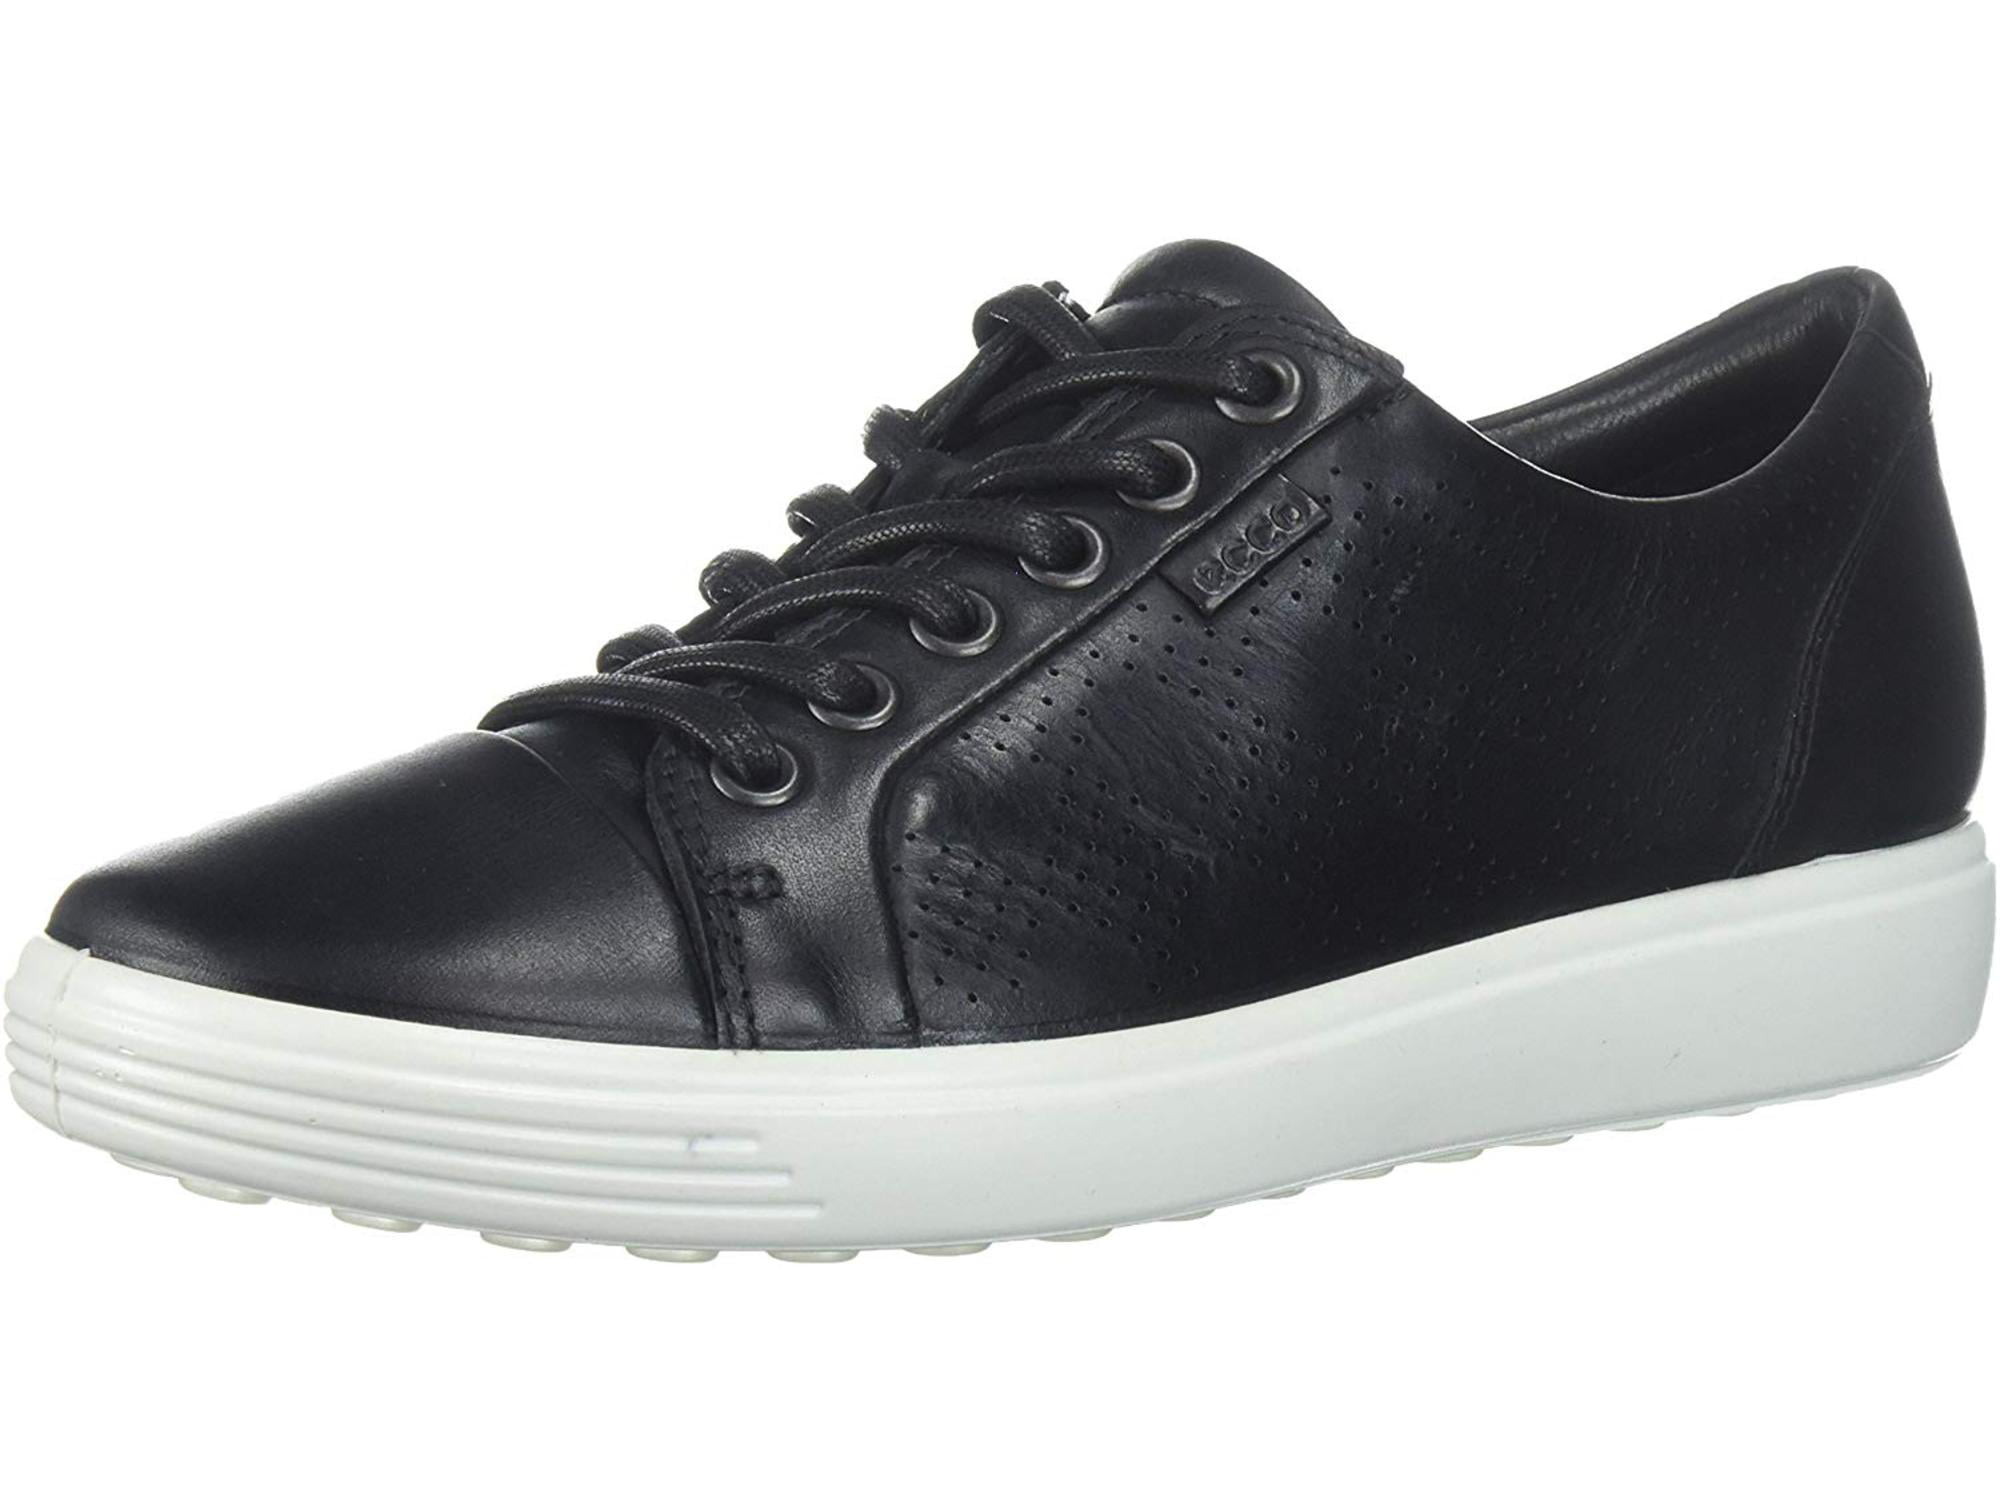 ecco perforated leather sneaker